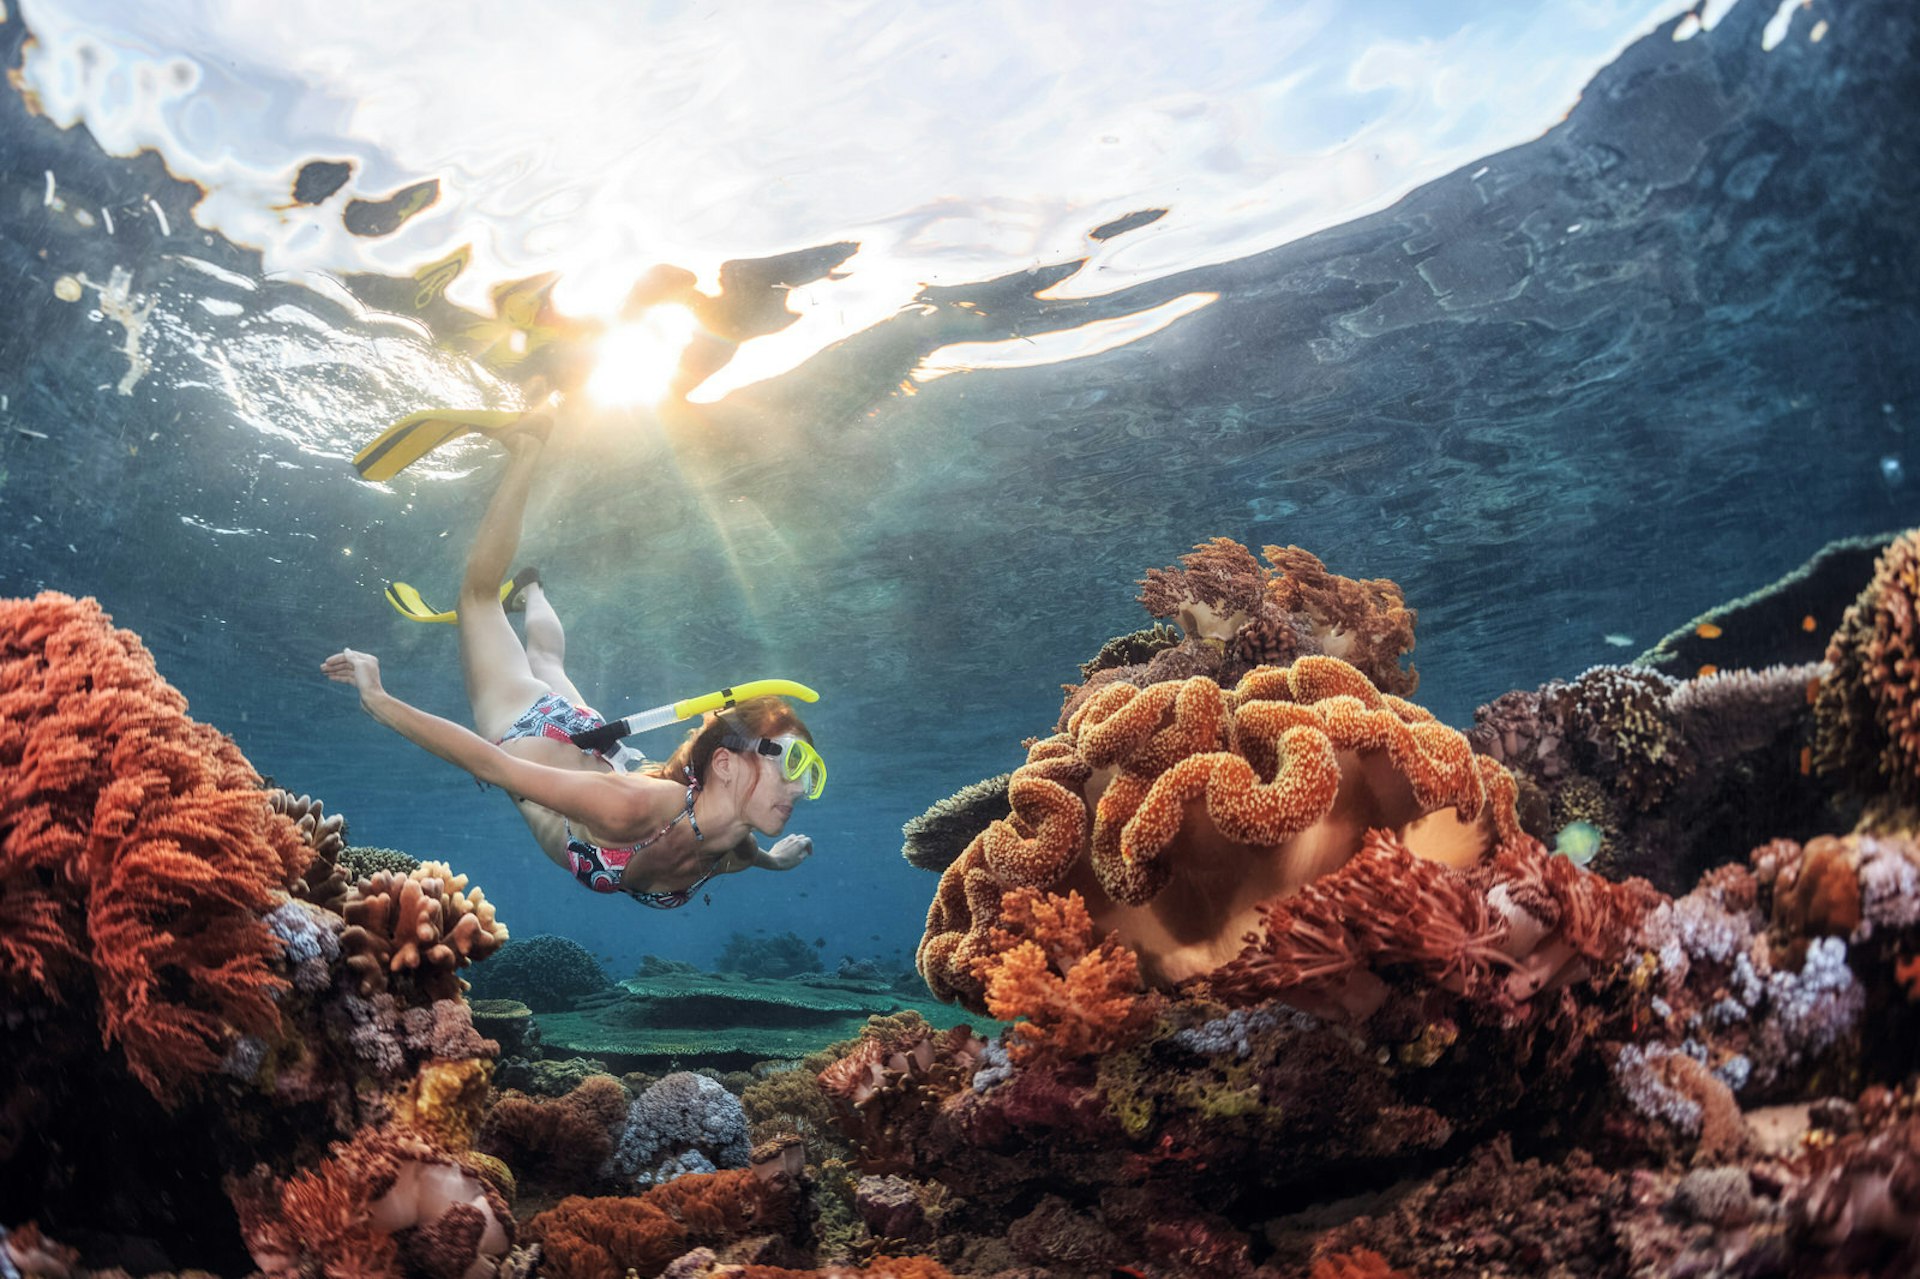 An underwater view of coral reef formations as a young woman snorkels overhead © Dudarev Mikhail / Shutterstock